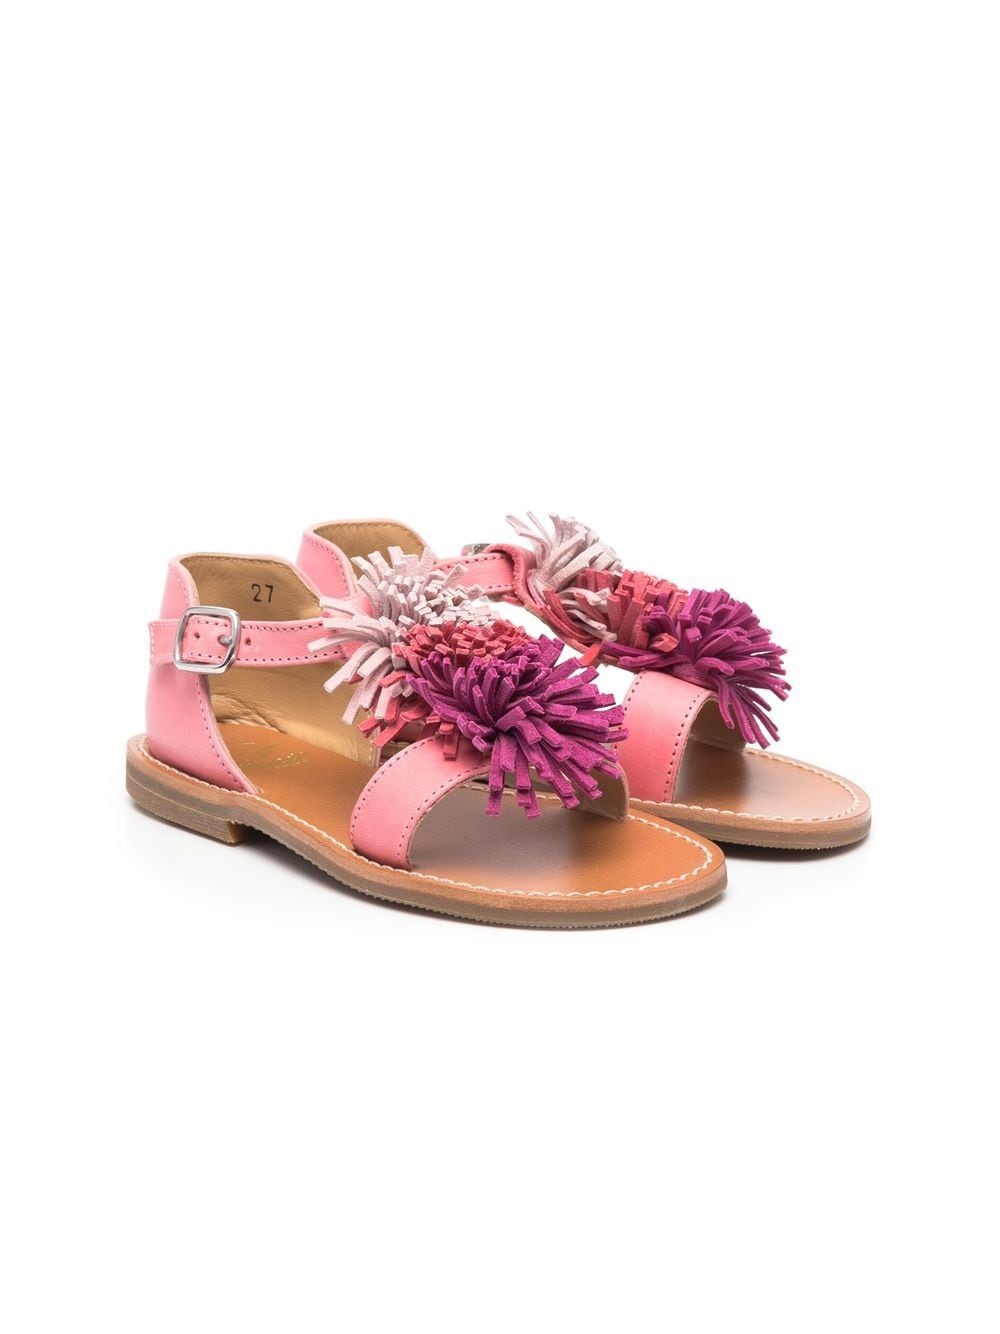 Image 1 of Gallucci Kids pompom-detail open-toe sandals